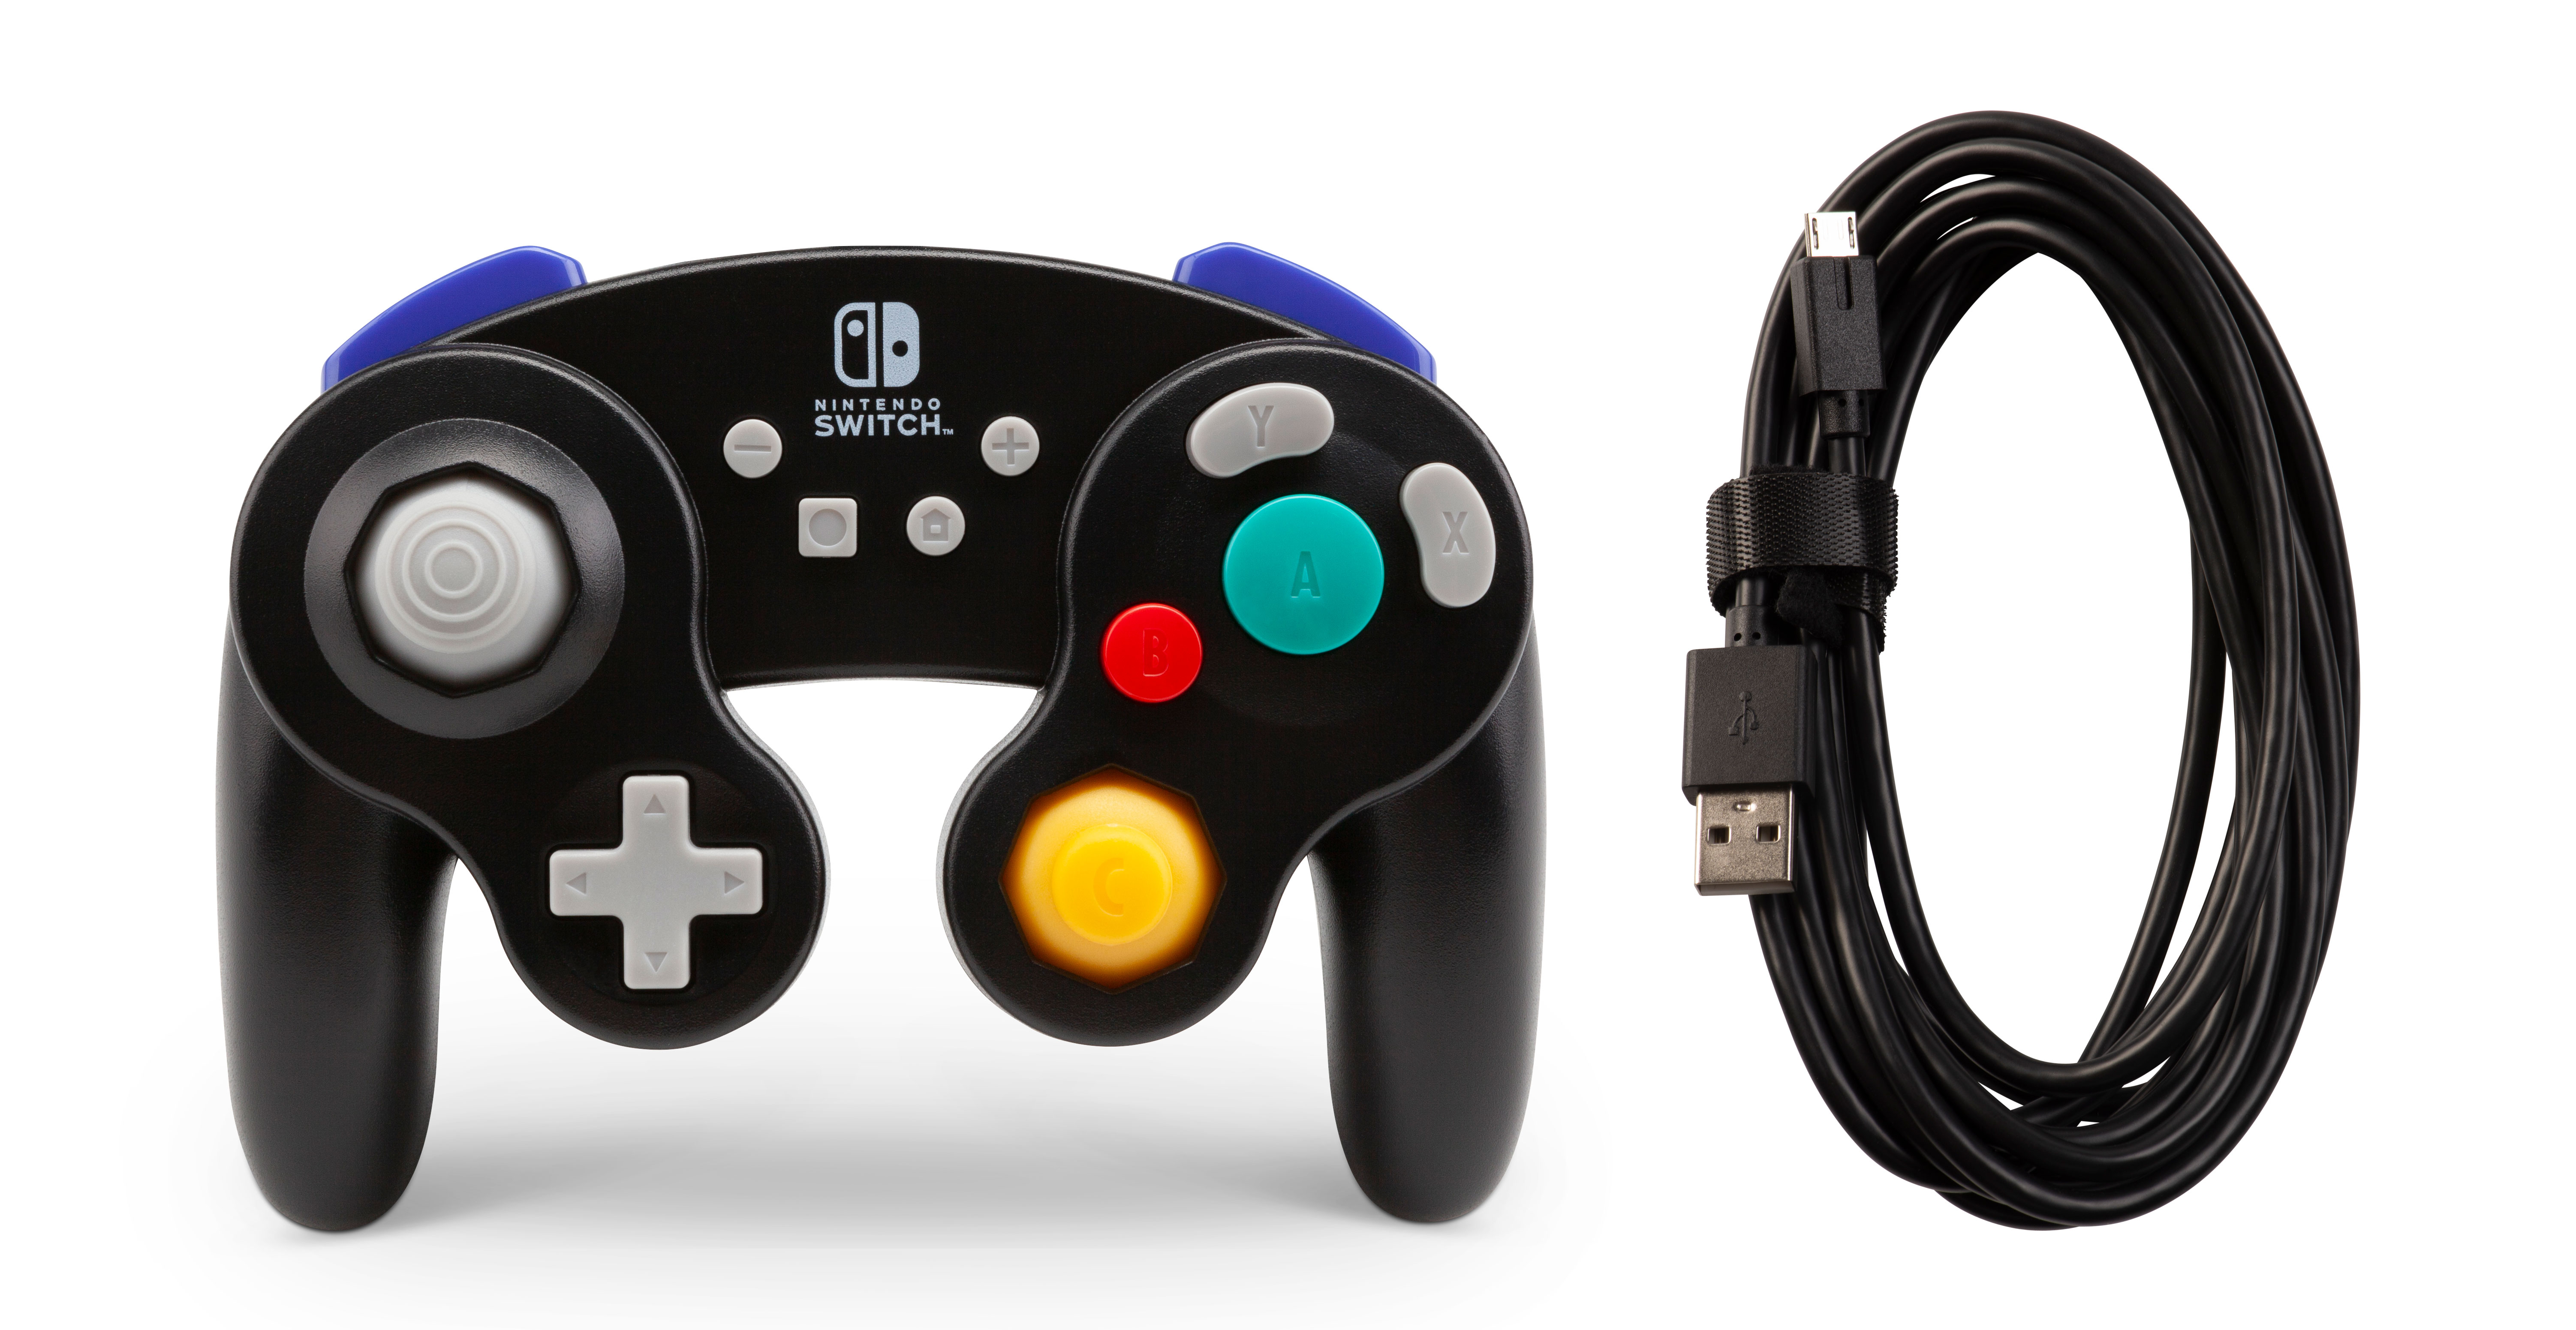 GameCube-style Wired Controllers for Nintendo Switch Key